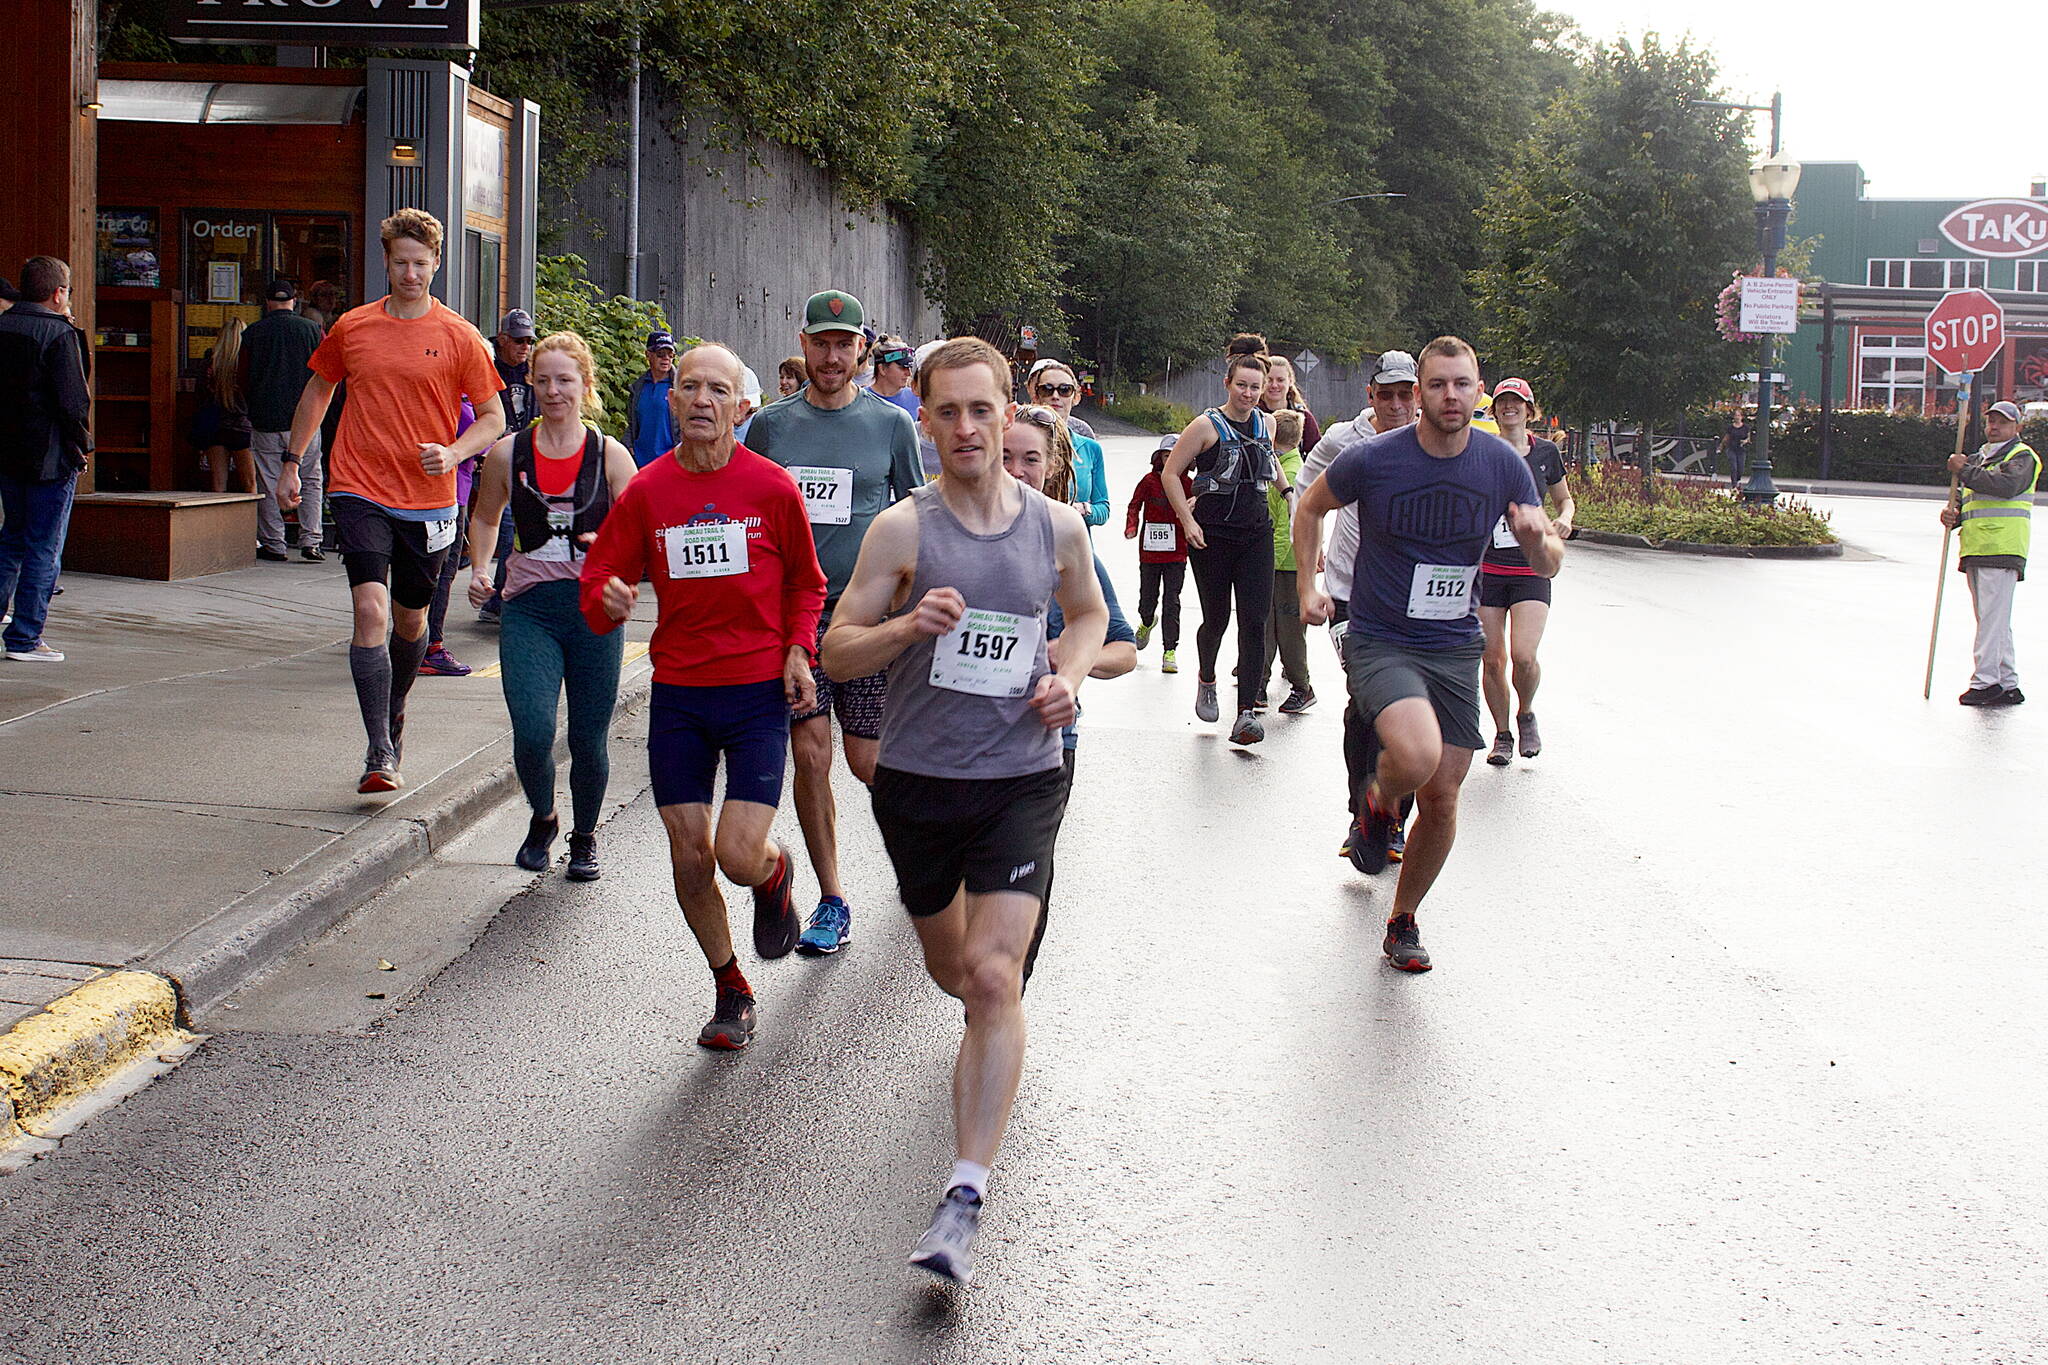 Twenty-two runners take off from the starting line of the Goldbelt Tram-Mount Roberts Run at the base of the tram on Saturday morning. (Mark Sabbatini / Juneau Empire)